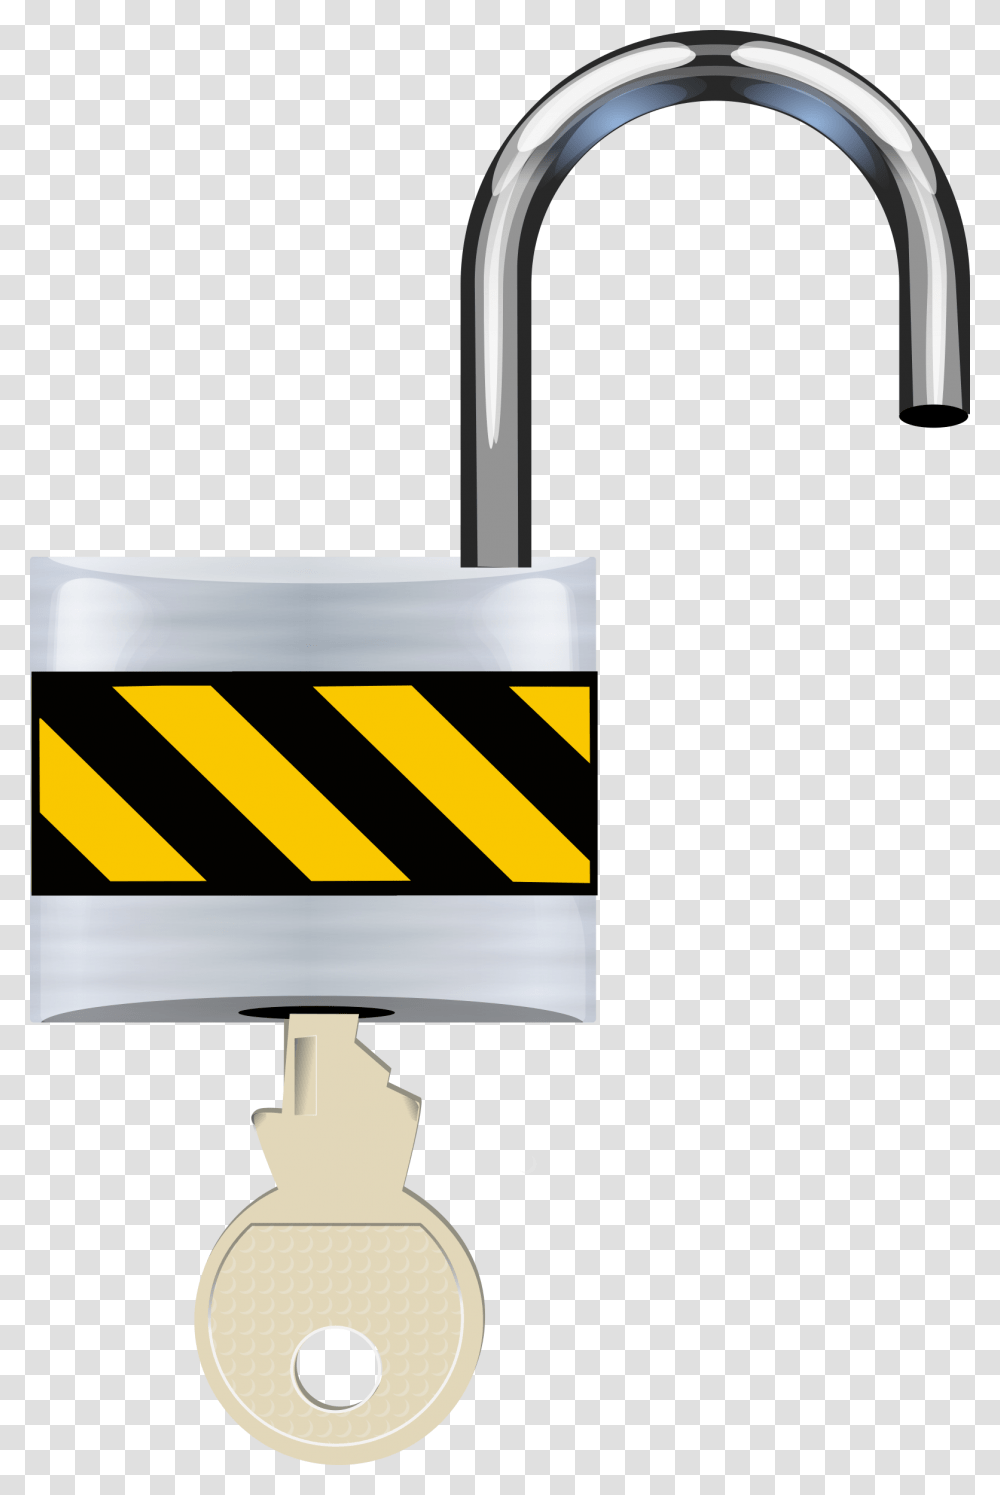 Padlock Open Icons, Sink Faucet, Lamp, Fence Transparent Png